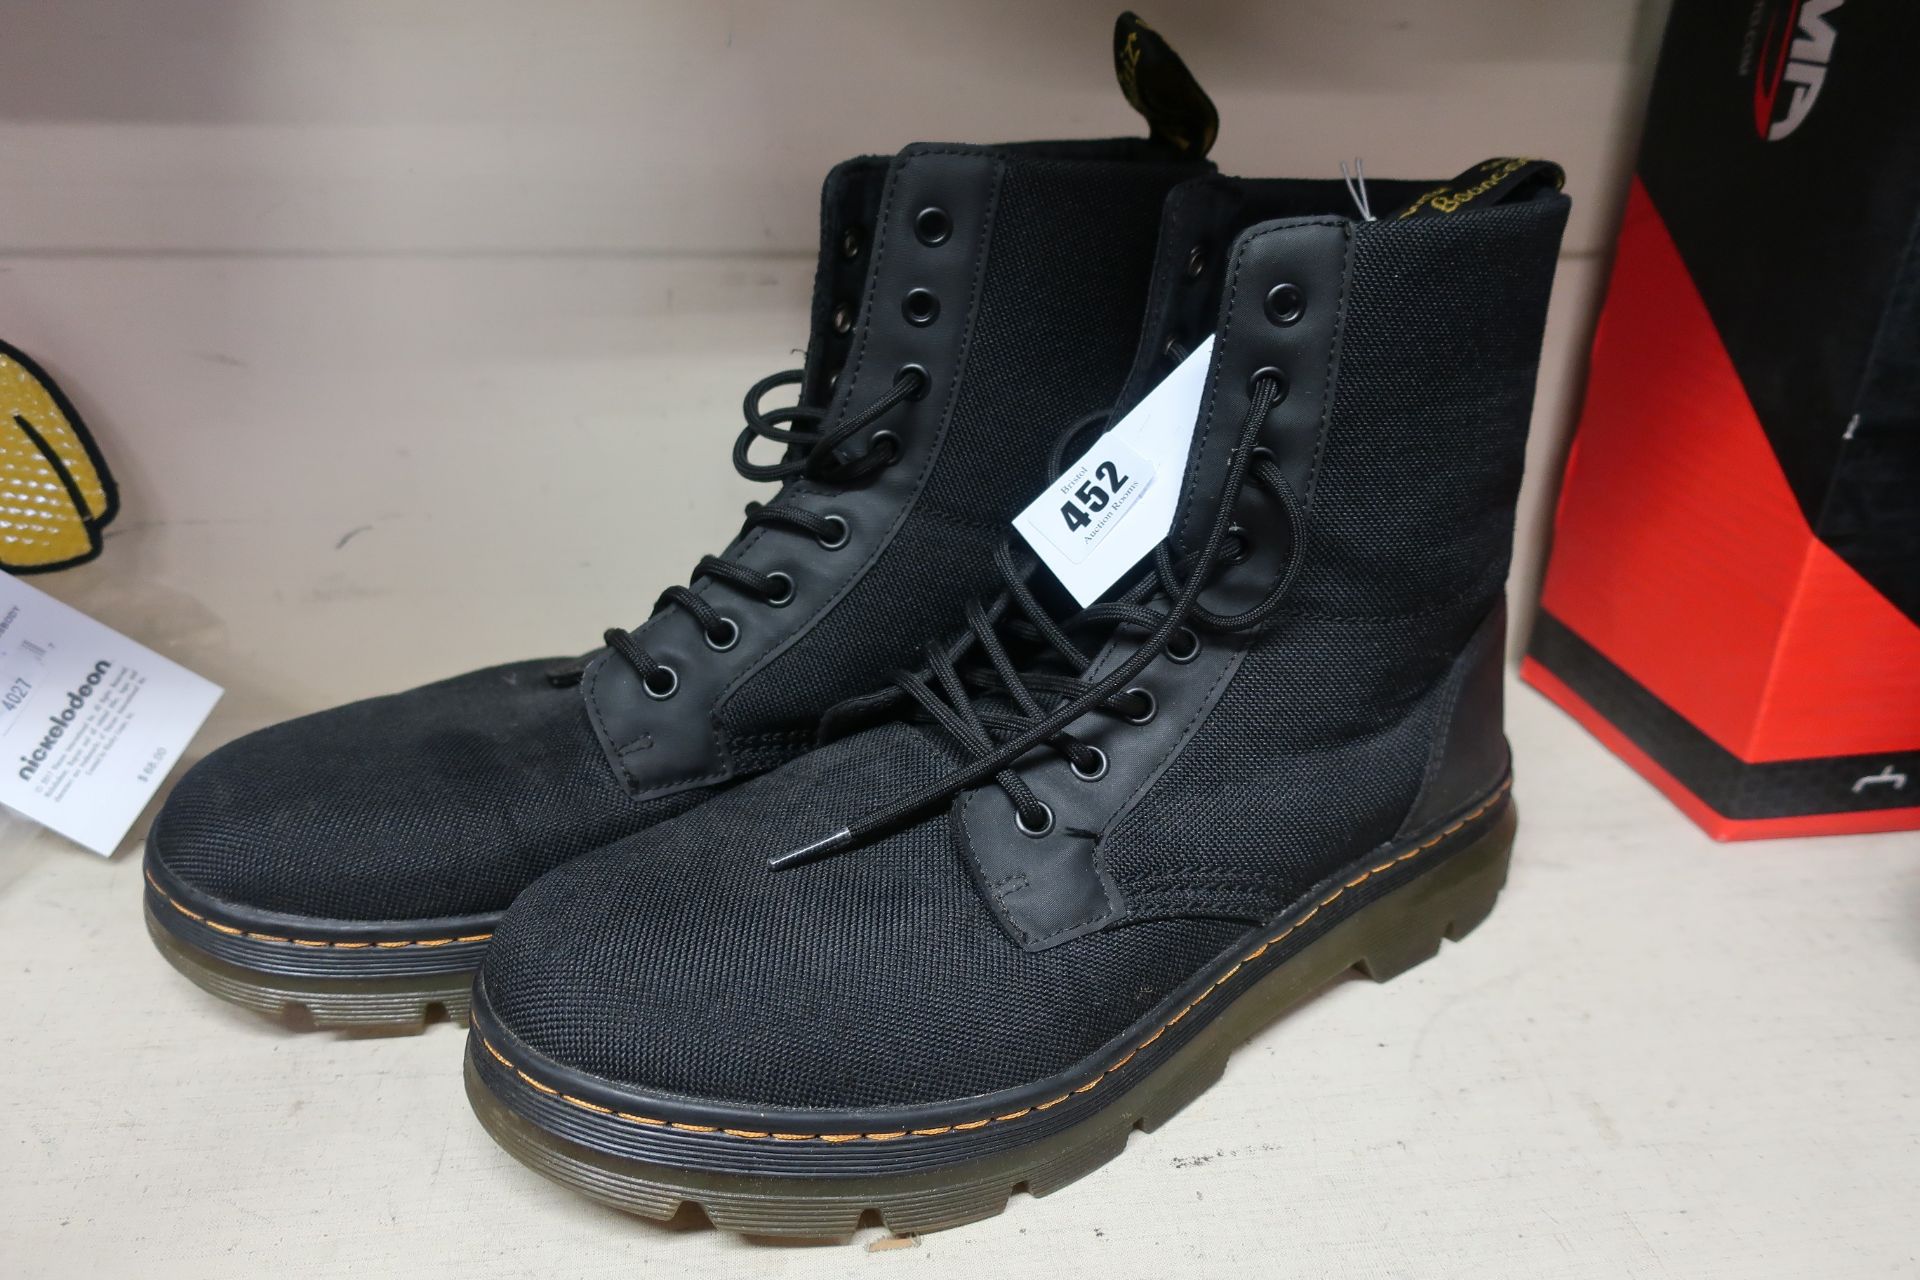 One pair of men's as new unboxed Dr Martens canvas and leather boots in black.